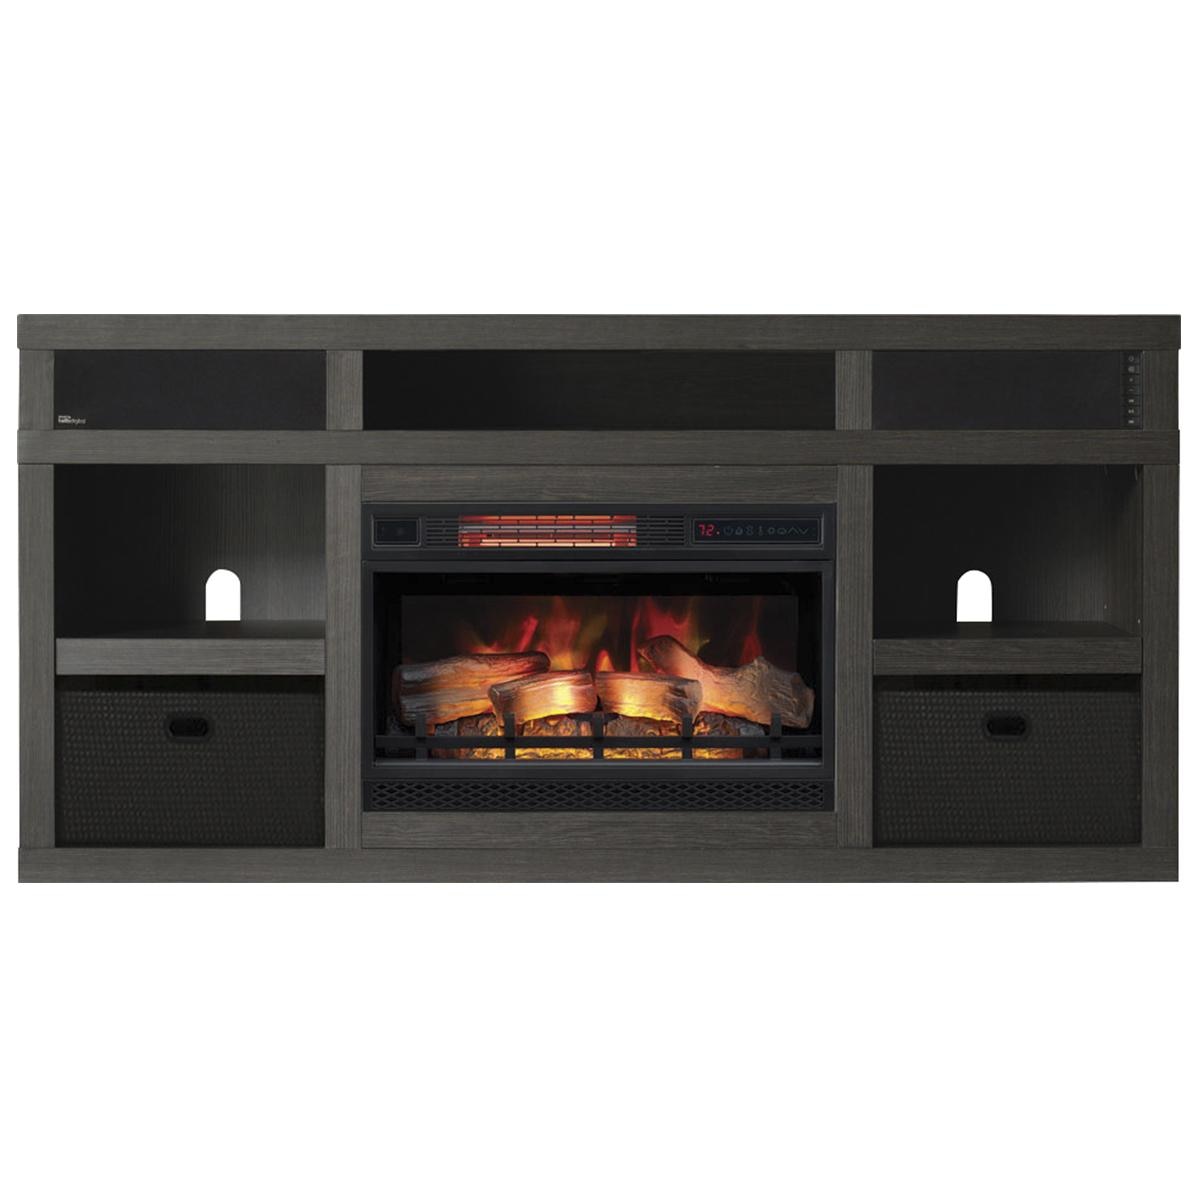 Used Gas Fireplace Best Of Fabio Flames Greatlin 3 Piece Fireplace Entertainment Wall